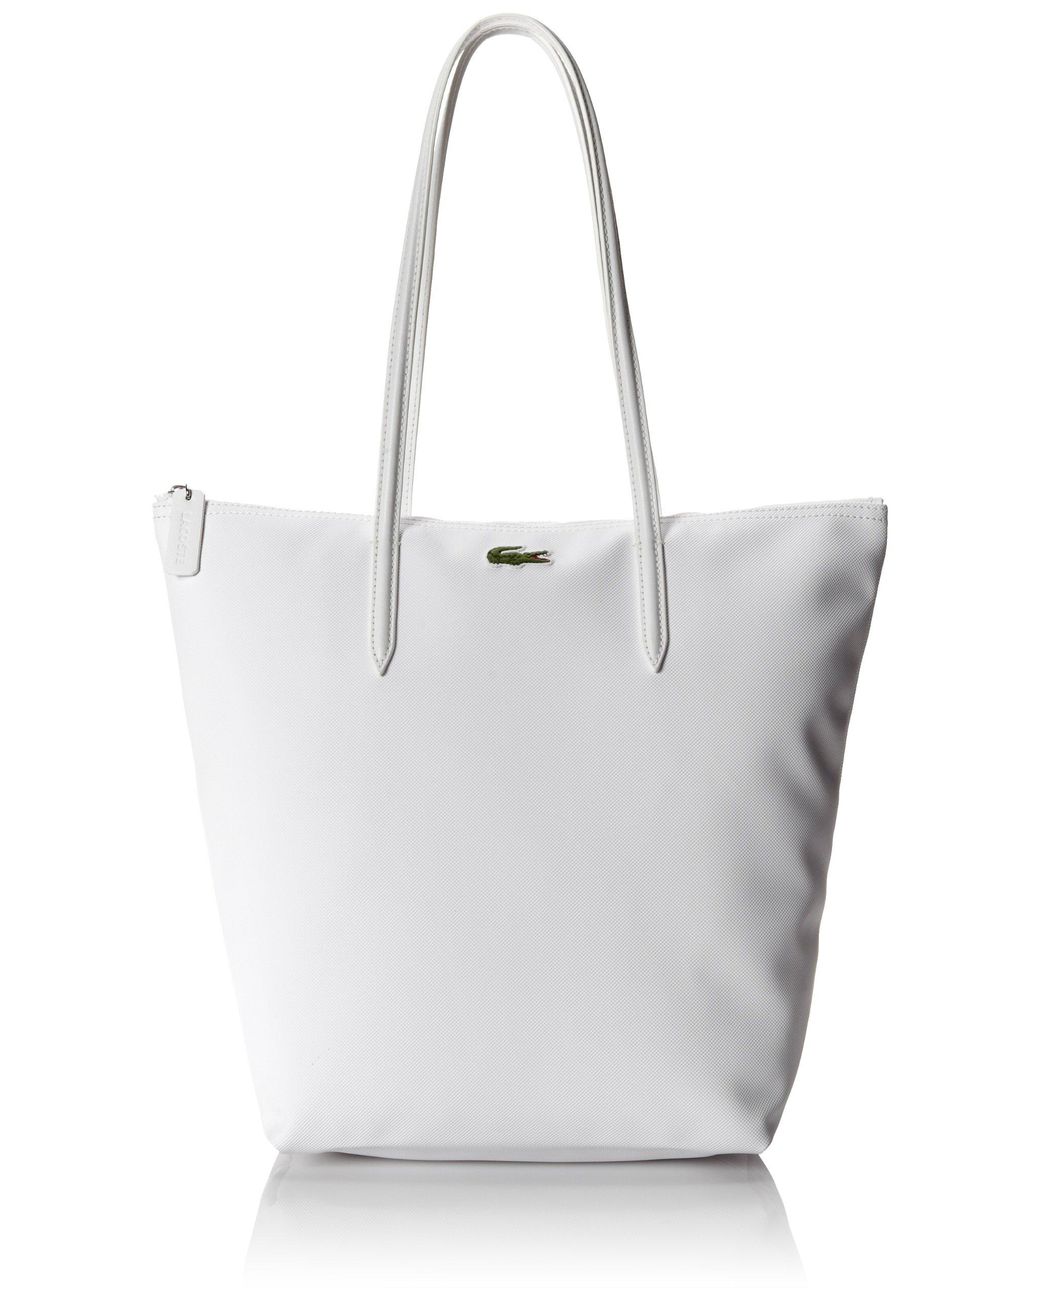 Lacoste Concept Vertical Tote Bag in White - Lyst